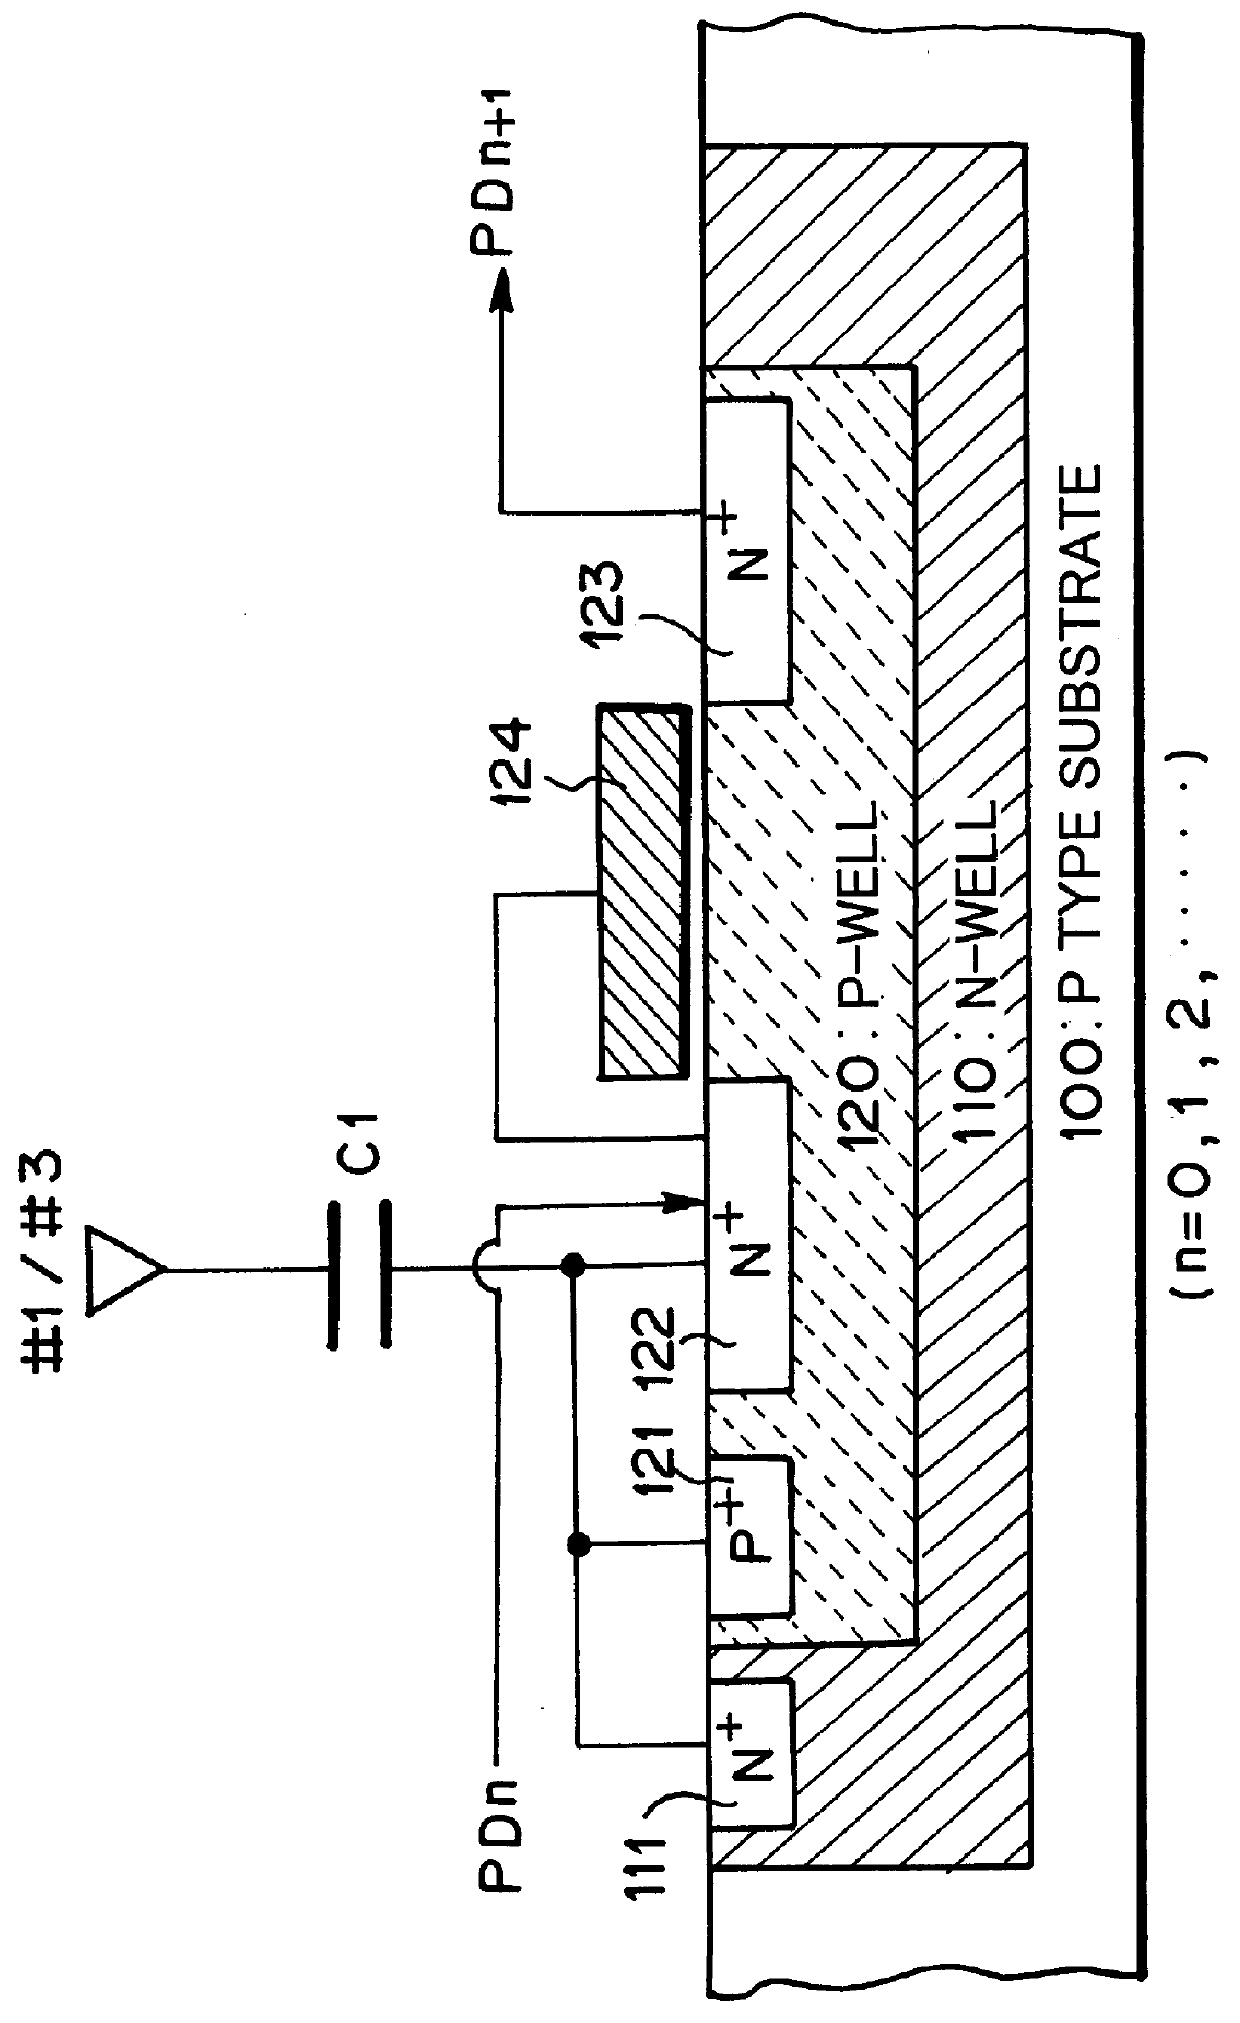 Booster circuit for semiconductor device